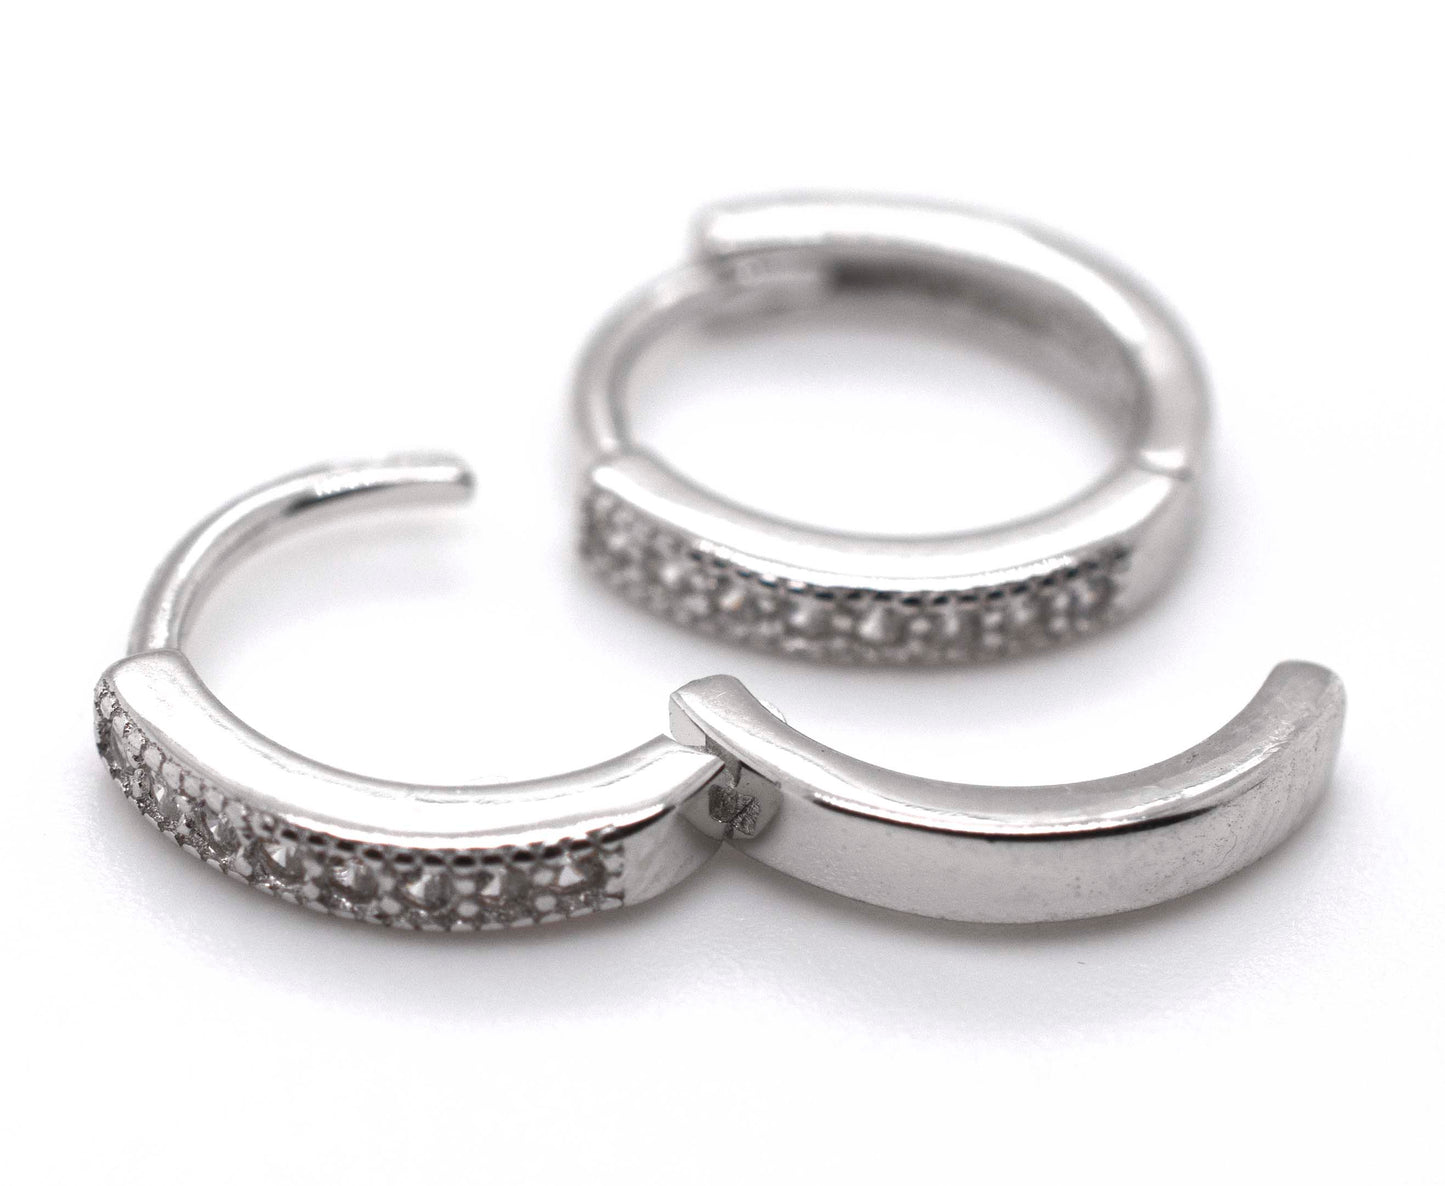 A pair of Small Pave Cubic Zirconia Hoops by Super Silver, a diamond alternative.